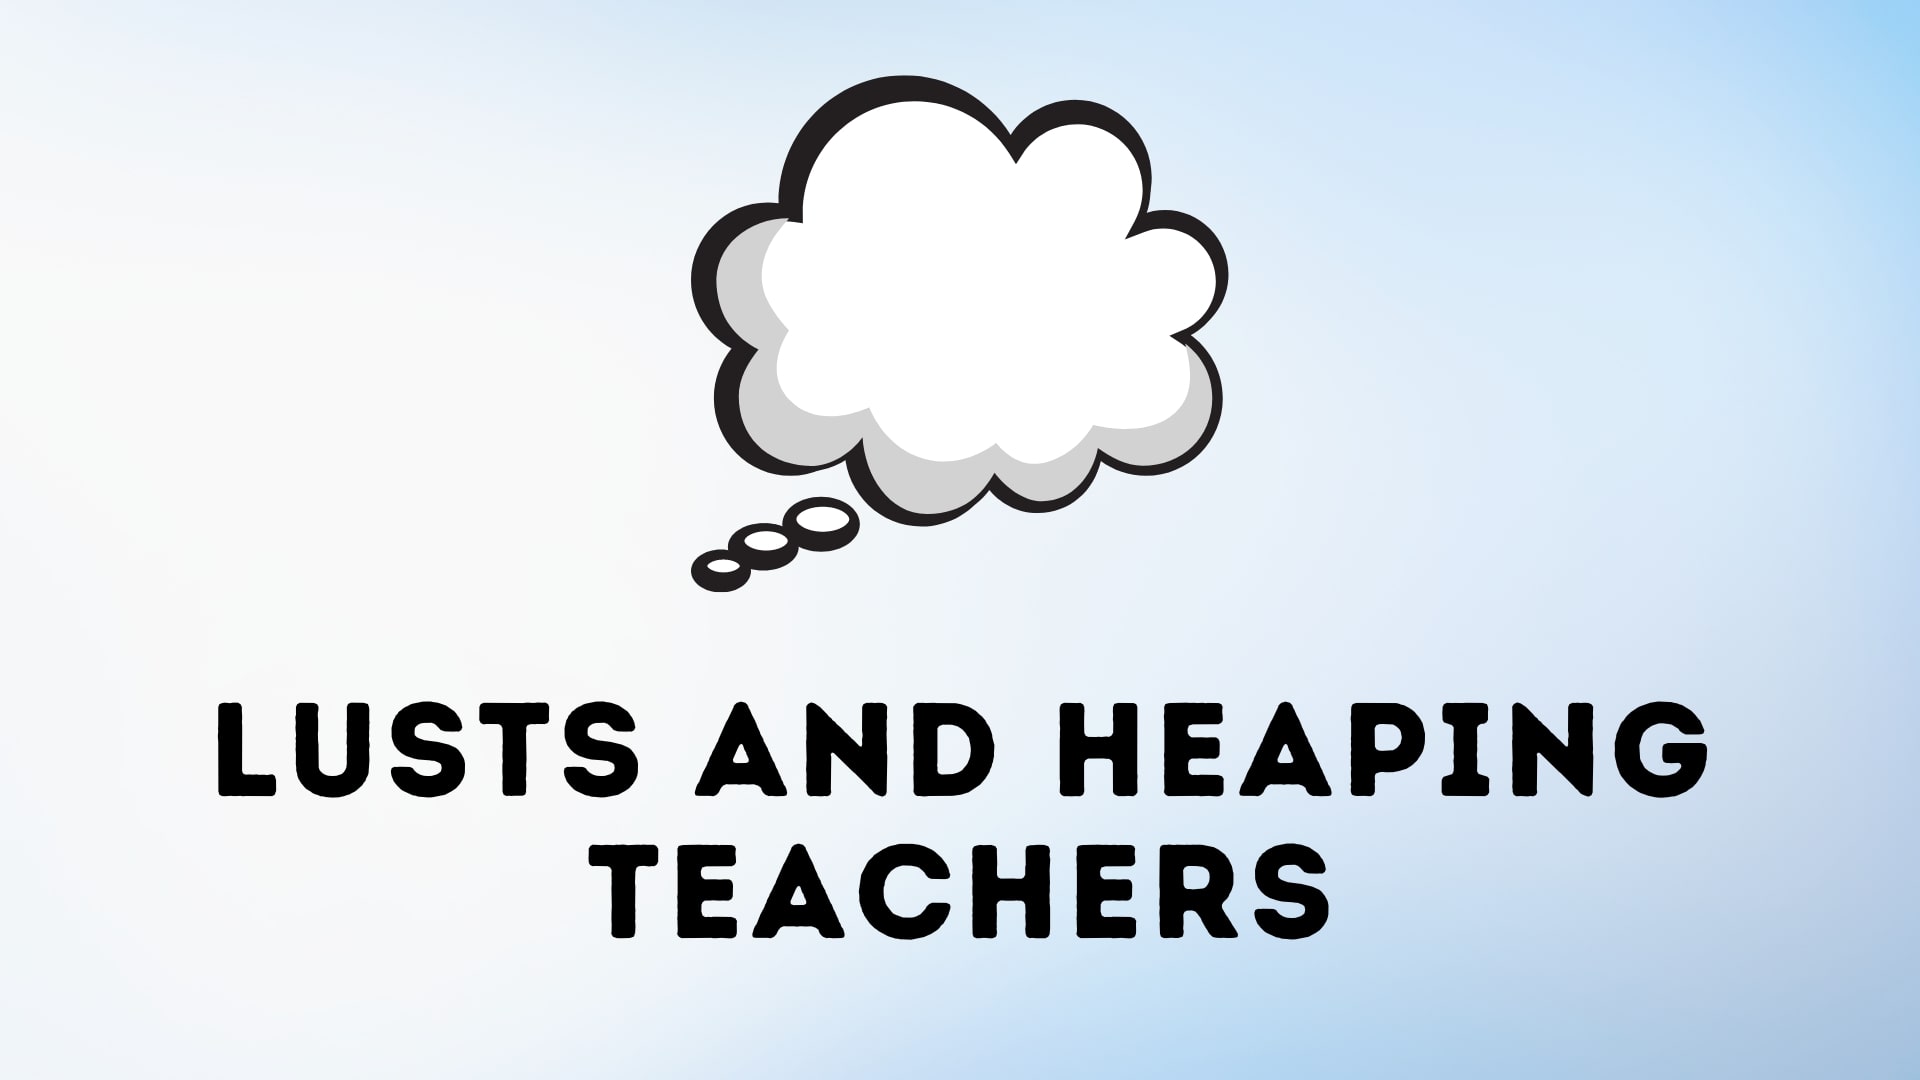 Lusts and Heaping Teachers